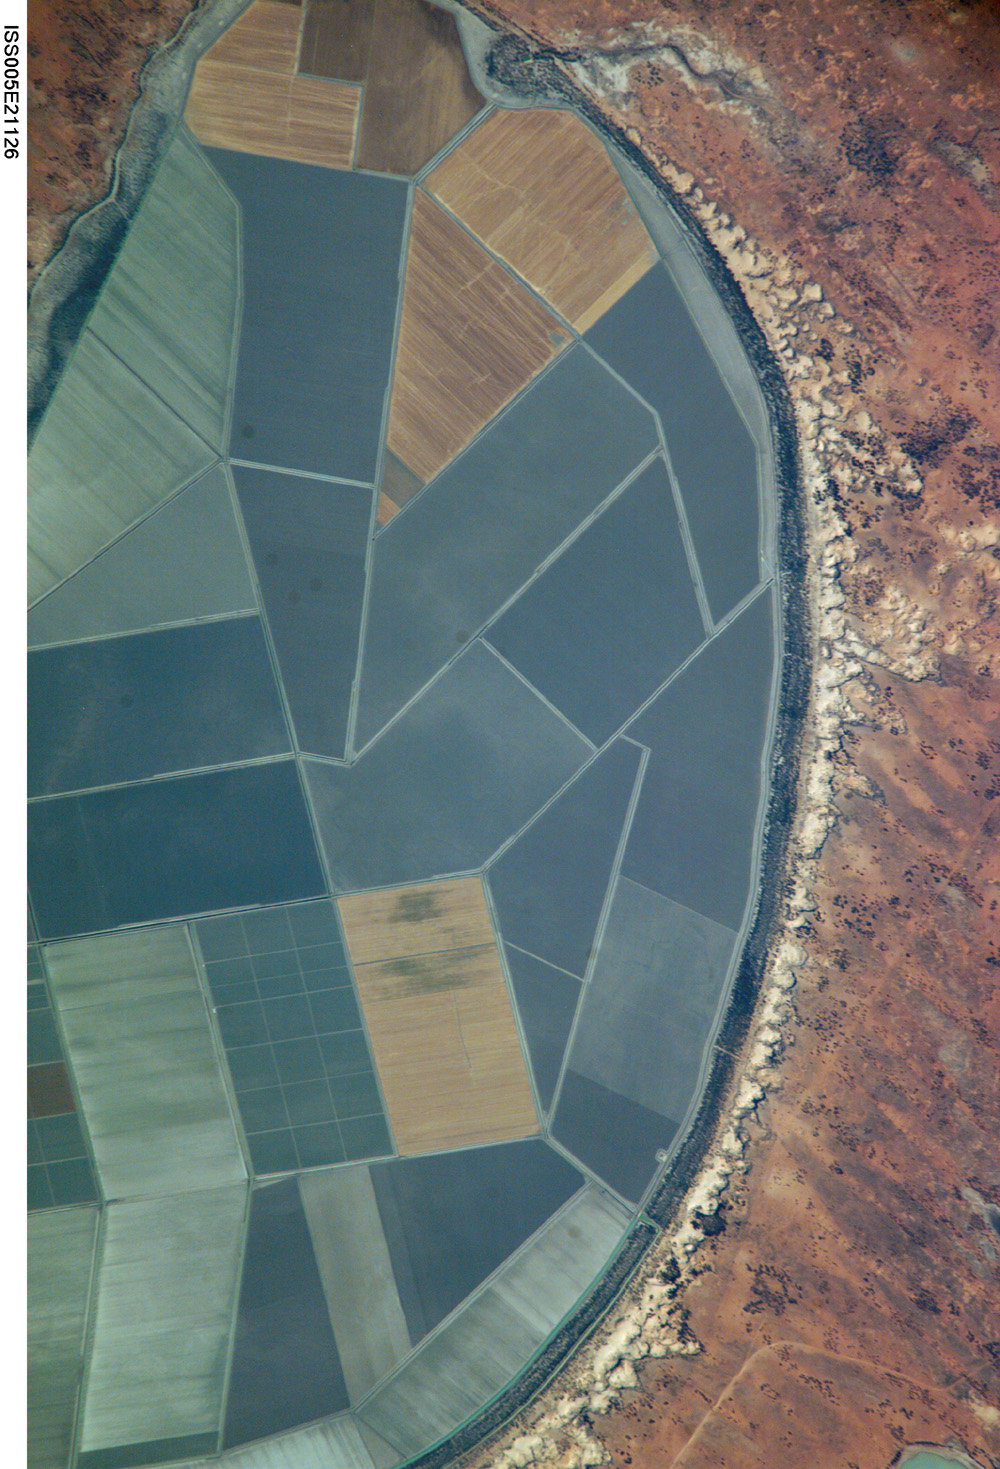 Lake Tandou, New South Wales, Australia - related image preview